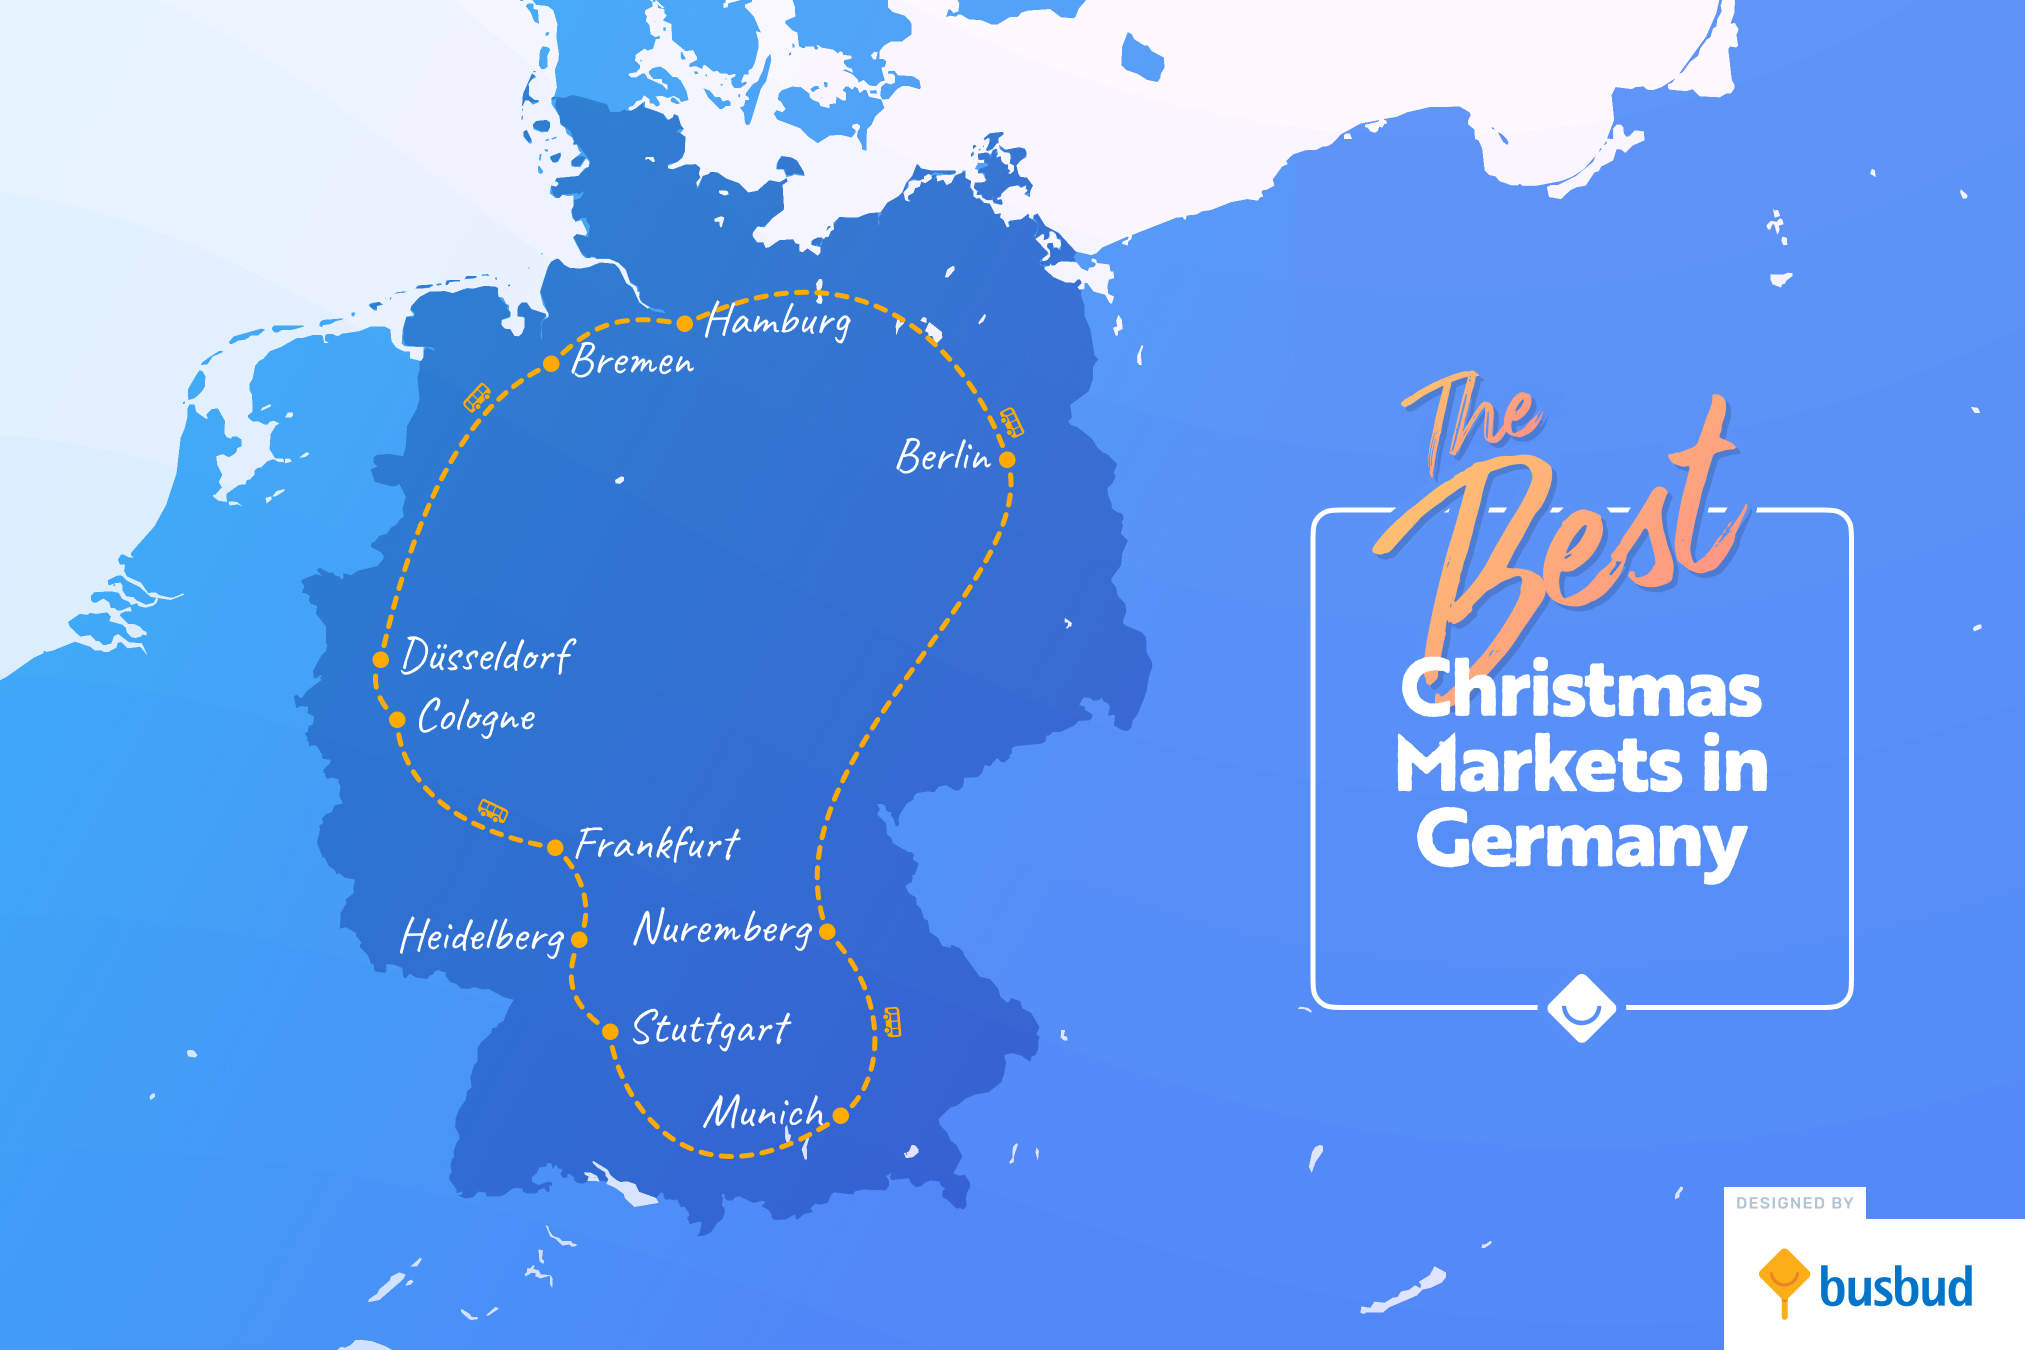 Map of Germany with the location of the 10 Christmas Markets highlighted